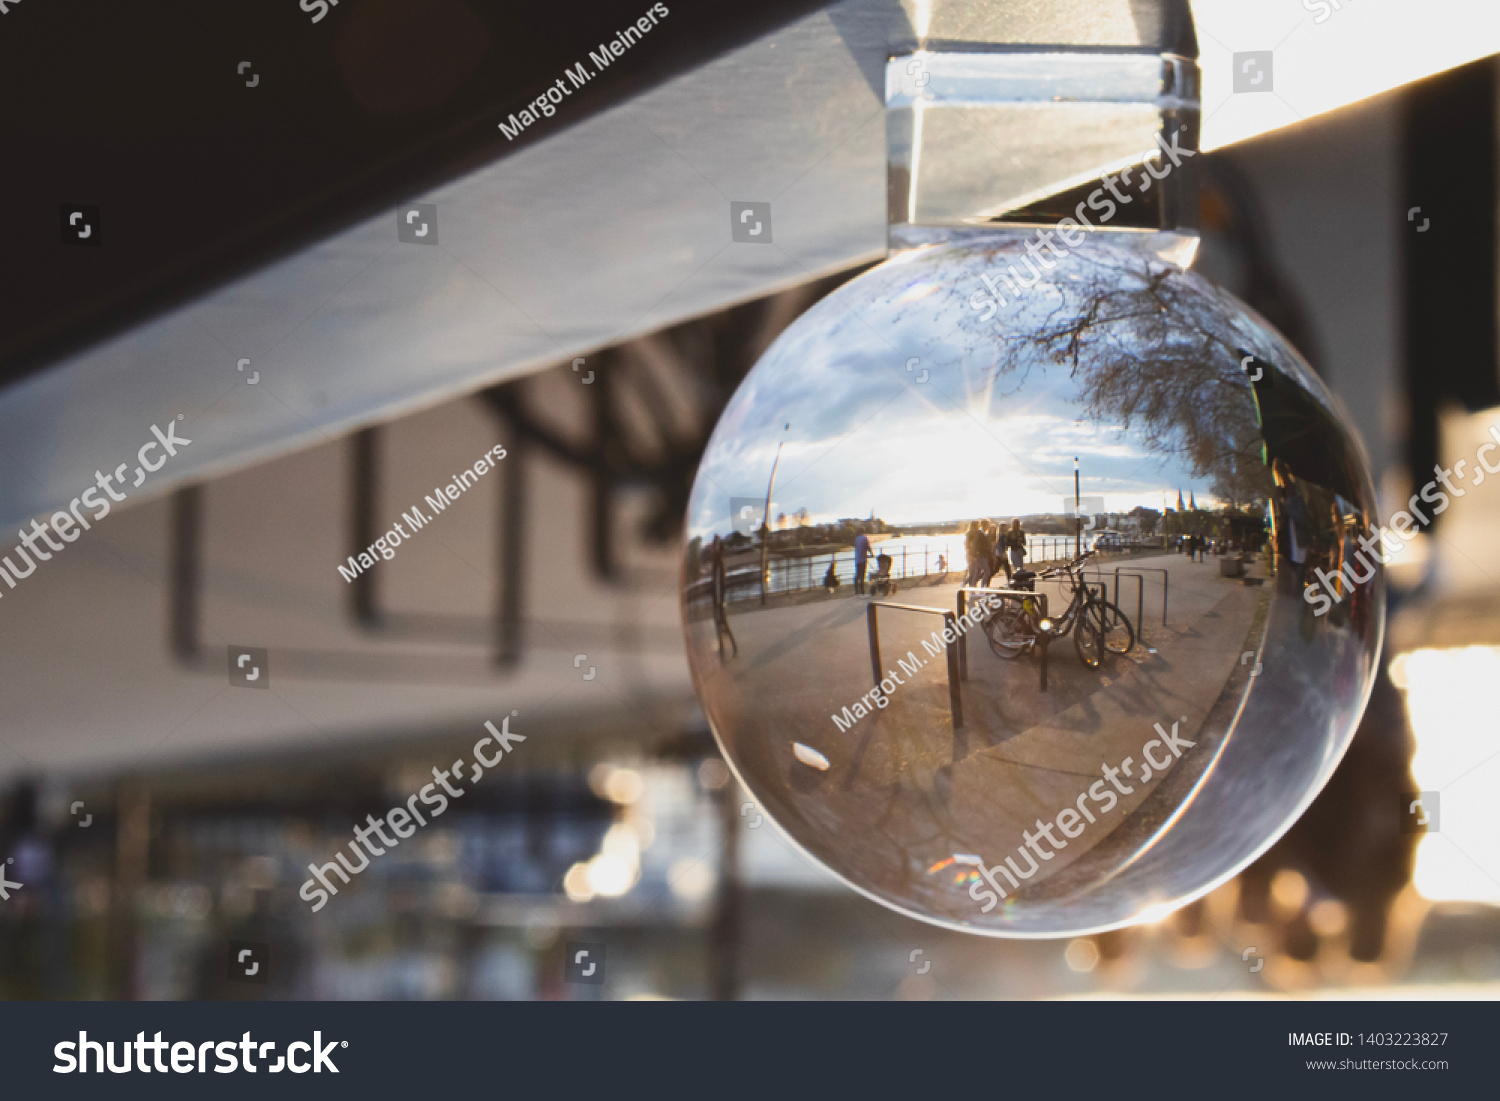 Moselle River in Germany through the glass ball  #1403223827